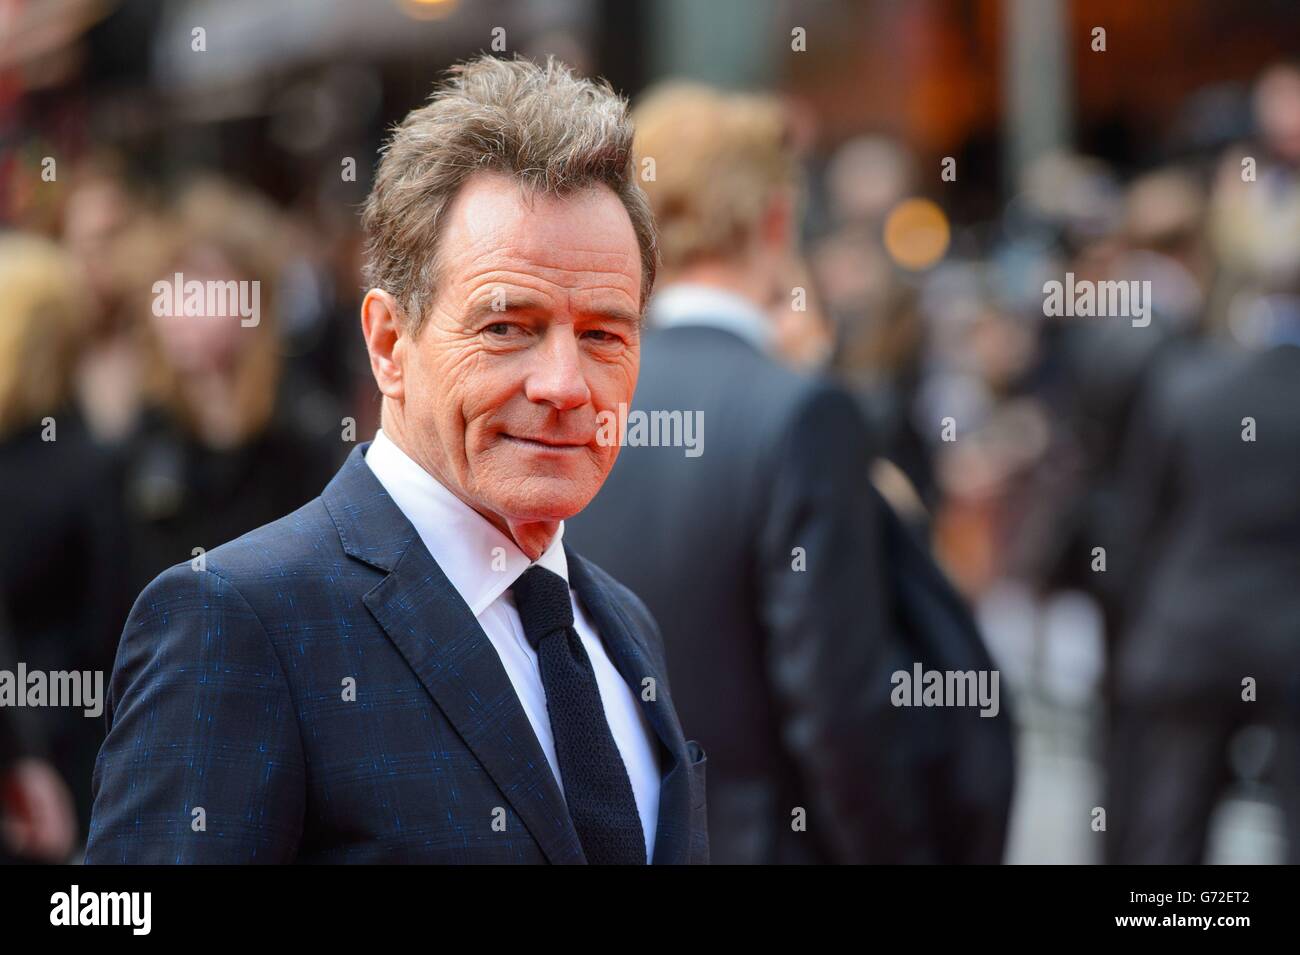 Bryan Cranston arriving at the European premiere of Godzilla, at the Odeon Leicester Square, central London. Stock Photo